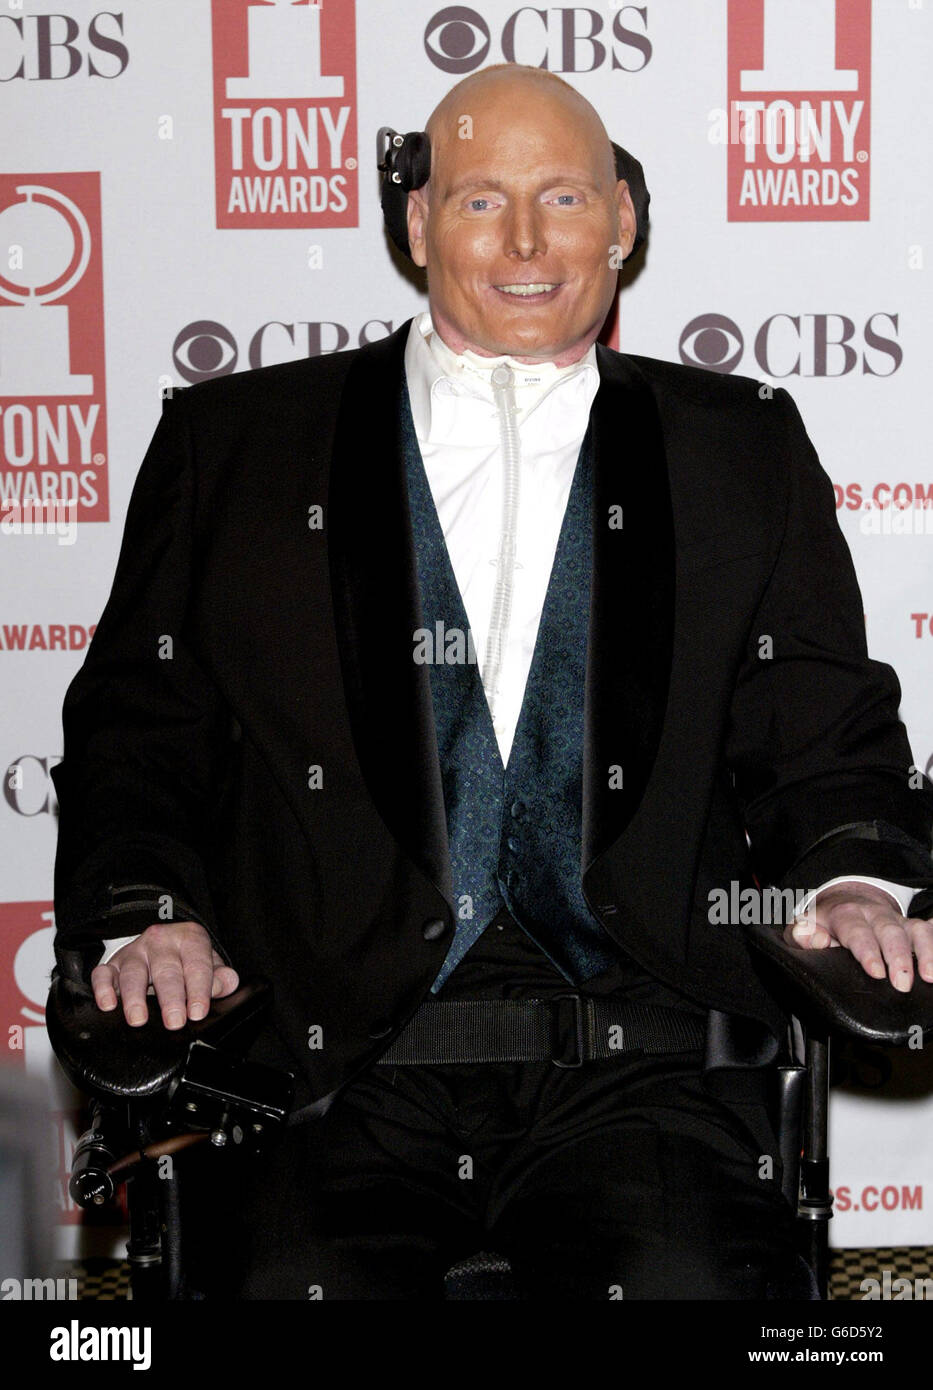 Presenter Christopher Reeve visits the press room at the 2003 Tony Awards at Radio City Music Hall in New York City. Stock Photo